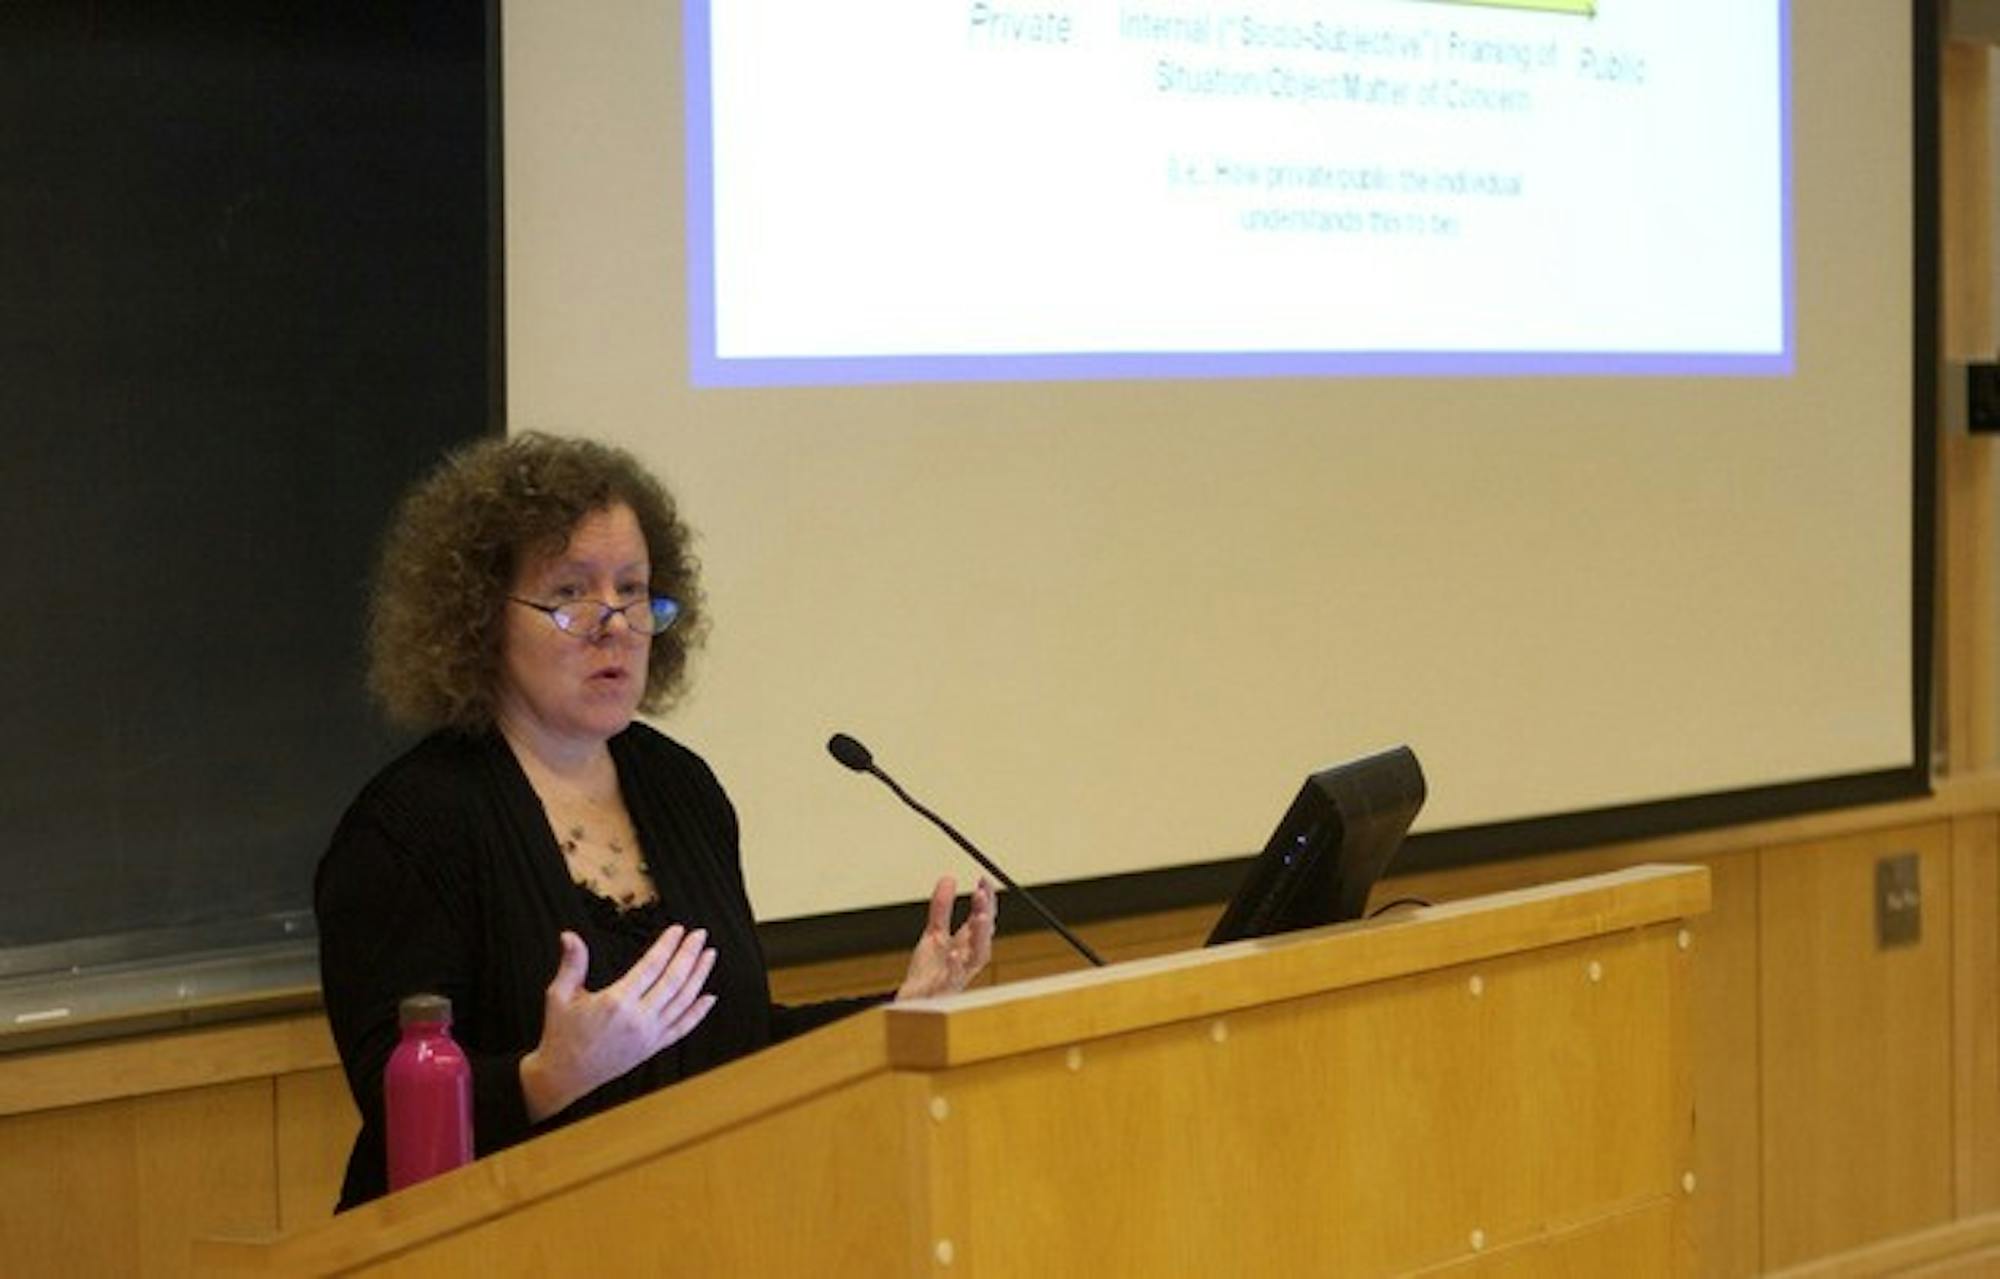 Illinois Institute of Technology sociology professor Christena Nippert-Eng discussed privacy and information sharing in a Wednesday lecture.